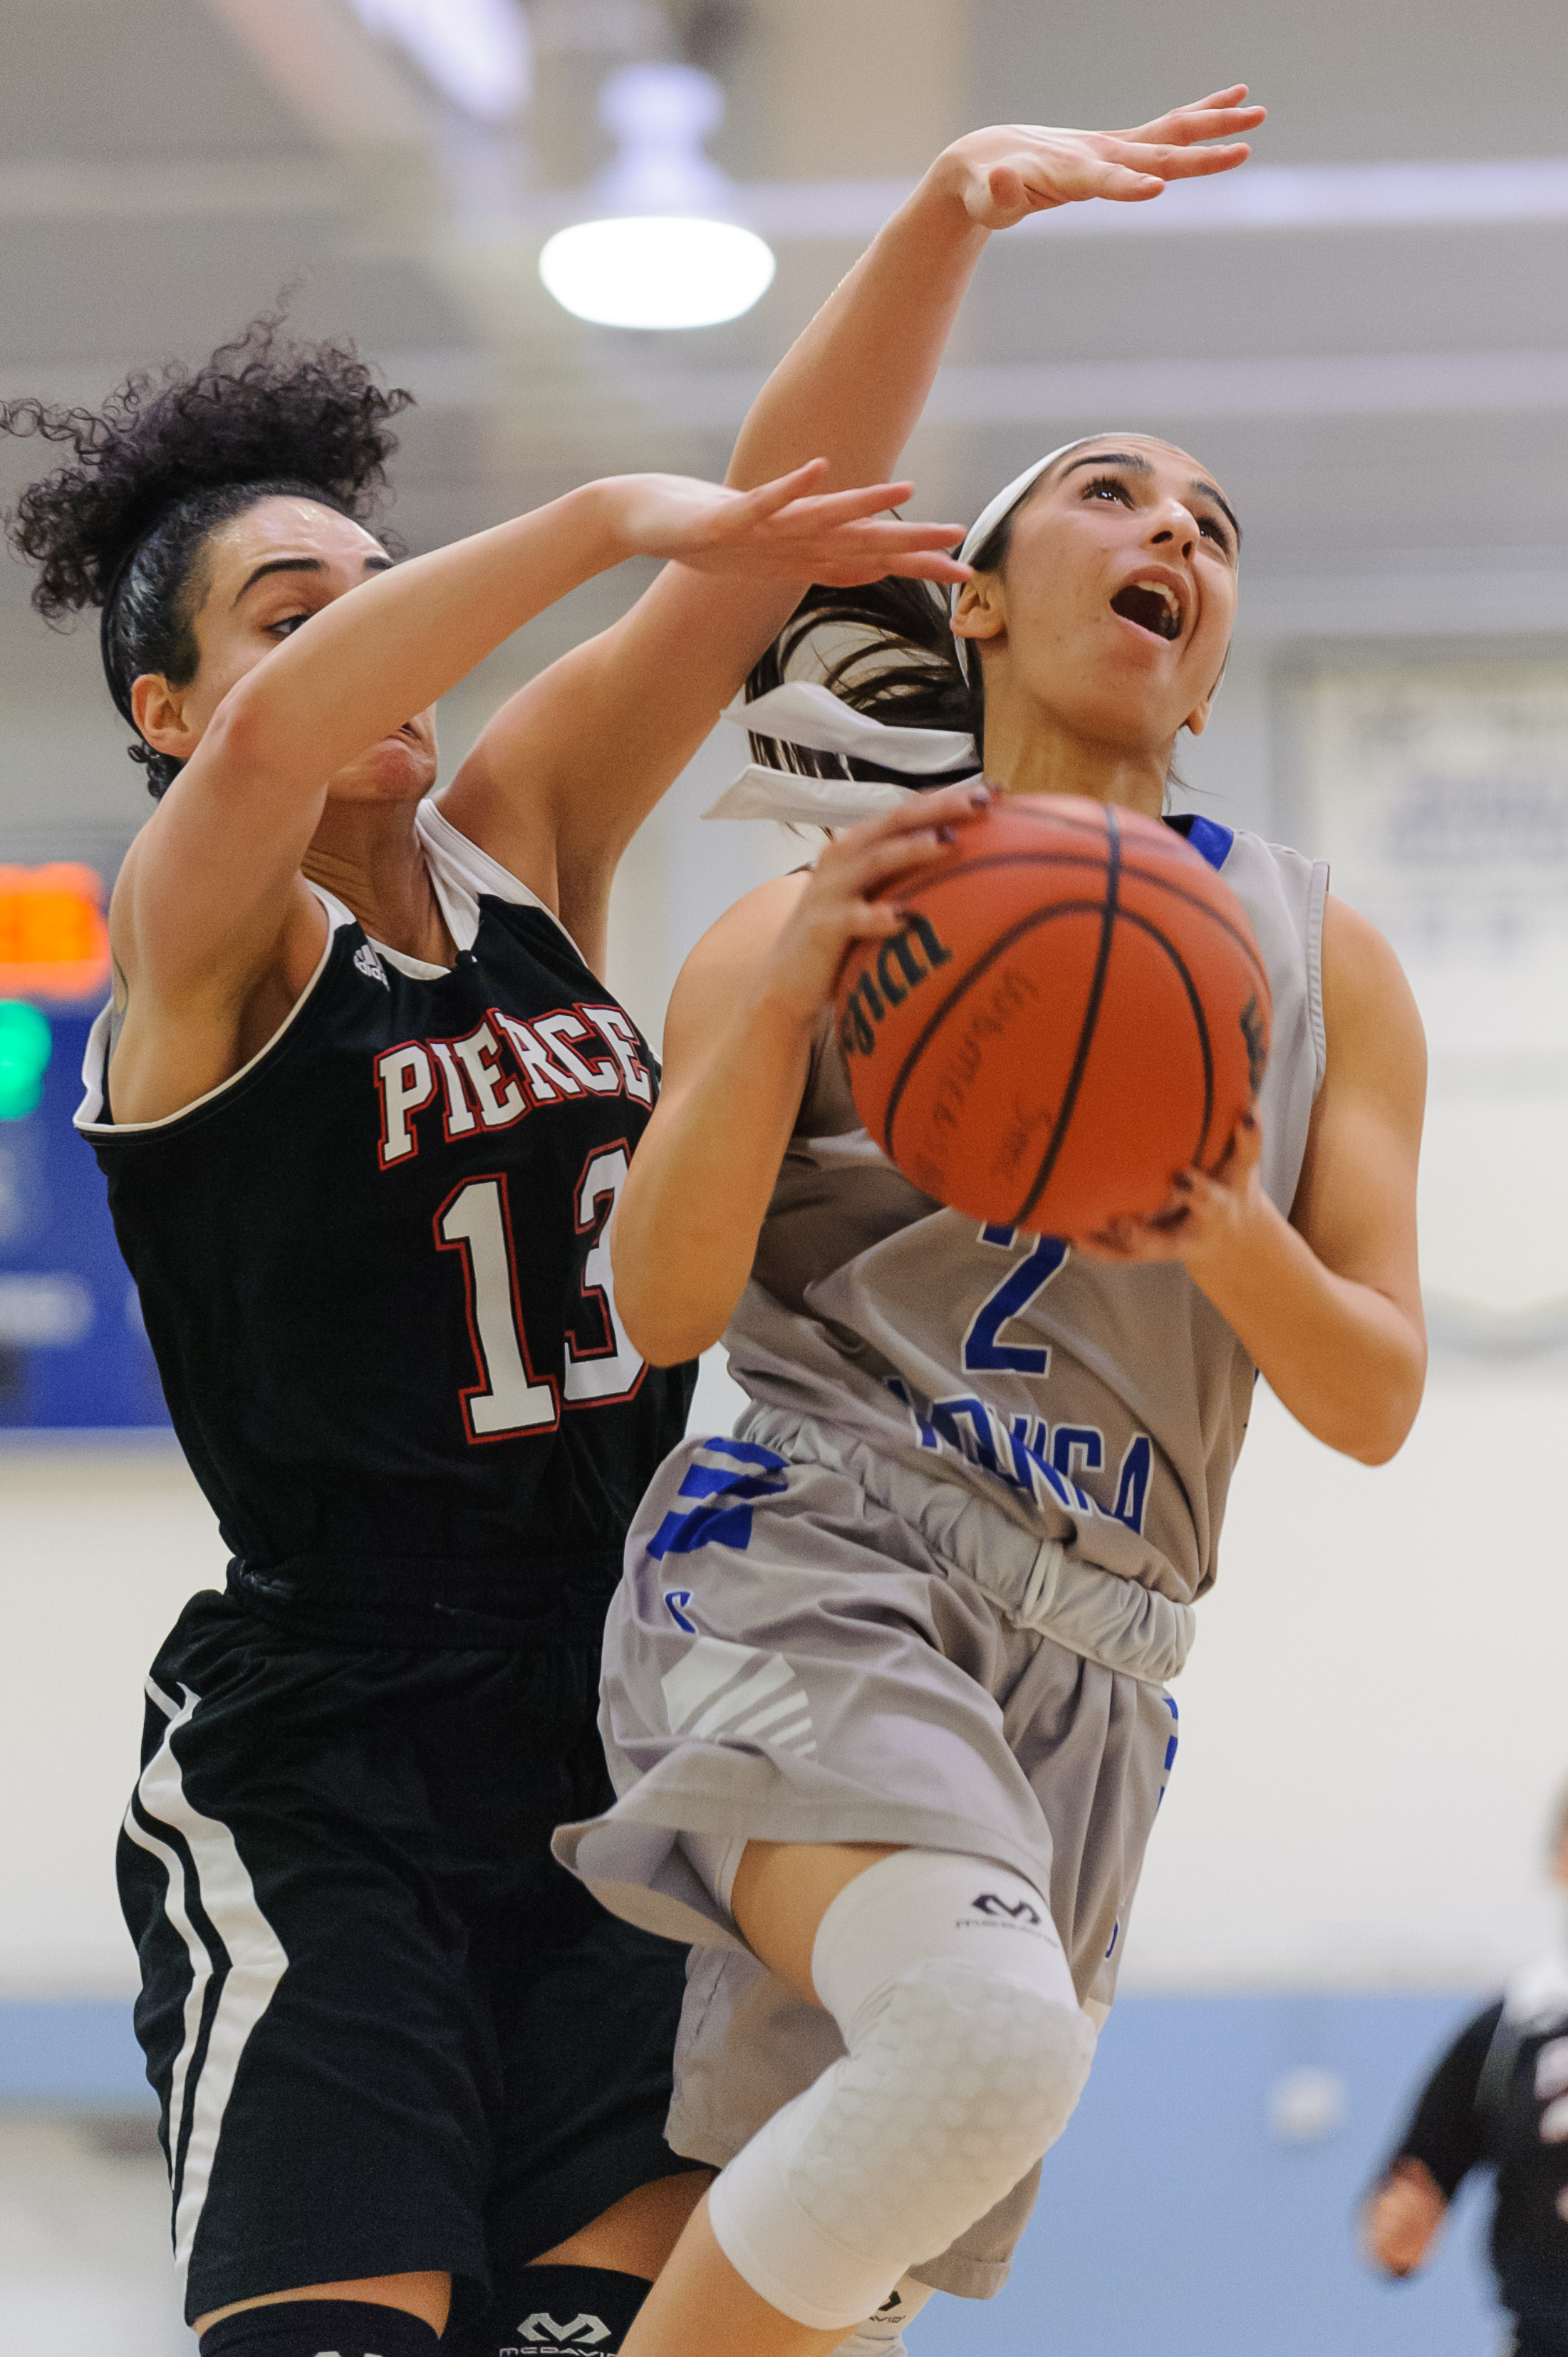  Guard Jessica Melamed (2,Right) of Santa Monica College attempts a difficult shot contested by Diana Kohanzad (13,Left) of Pierce College. The Santa Monica College Corsairs win their final game of the season 76-53 against the Pierce College Brahmas.